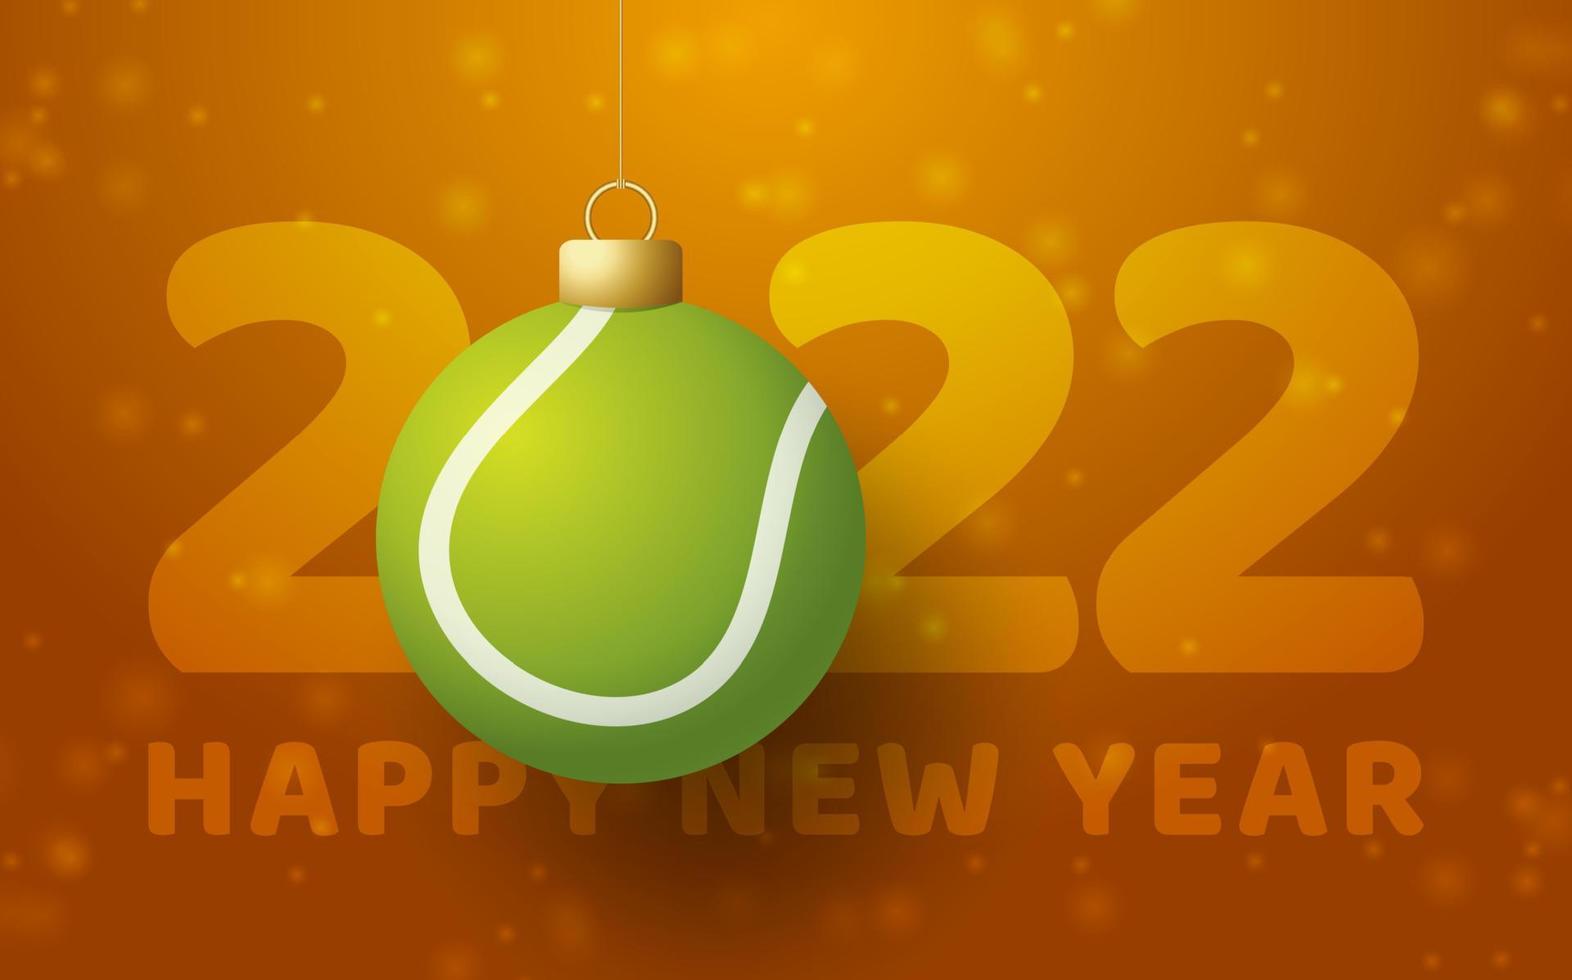 2022 Happy New Year. Sports greeting card with a tennis ball on the luxury background with snowflake. Vector illustration.